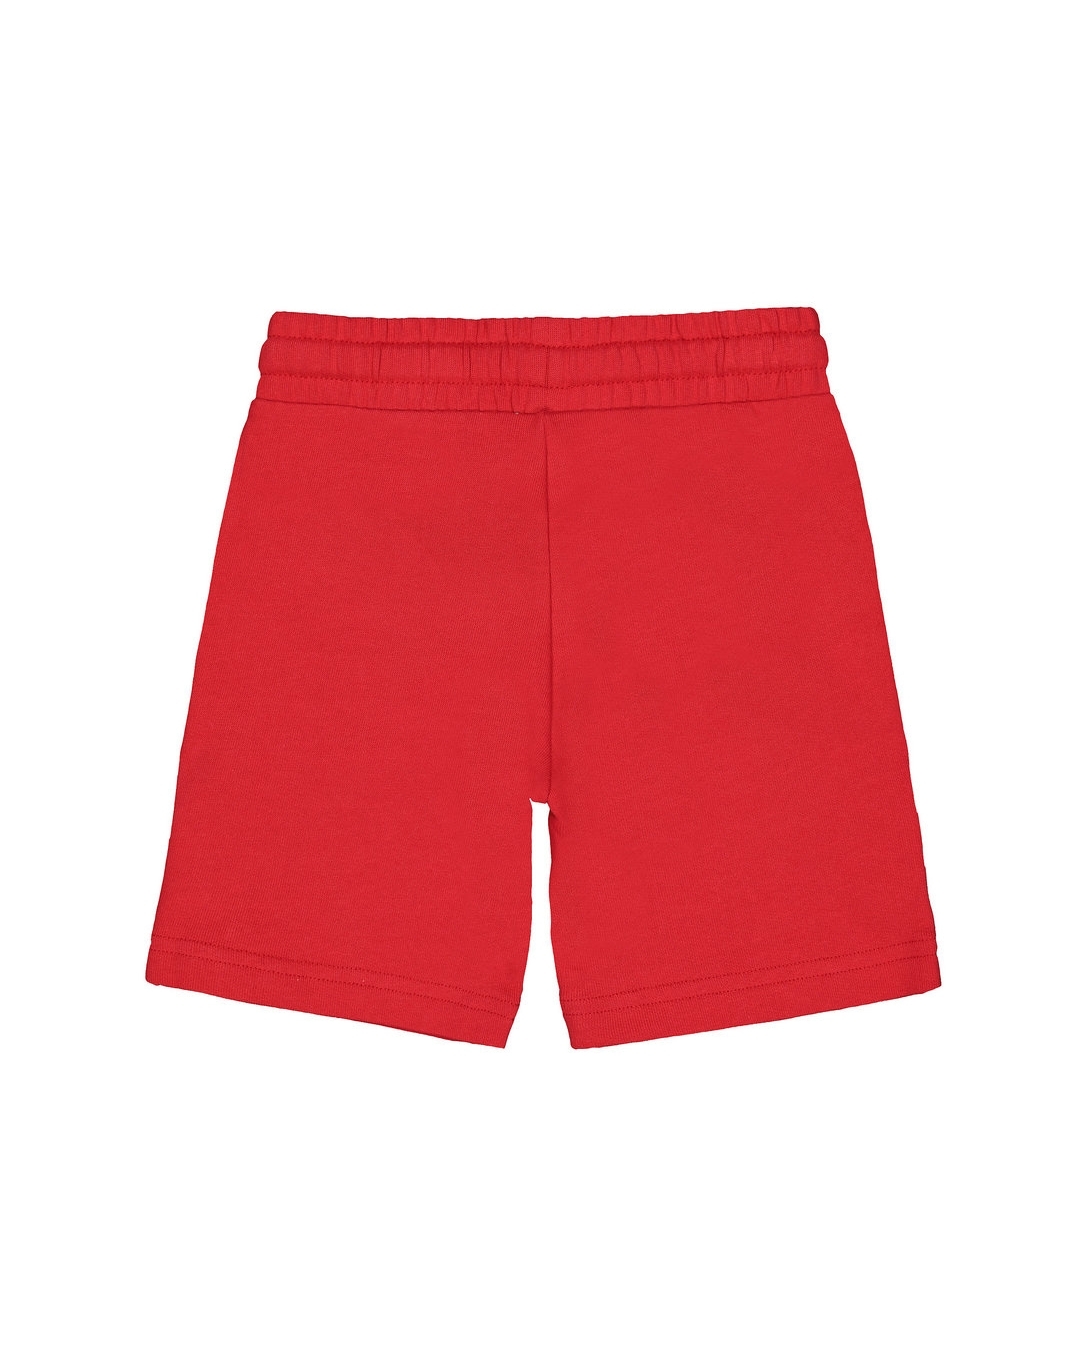 Buy Boys Shorts - Red Online at Best Price